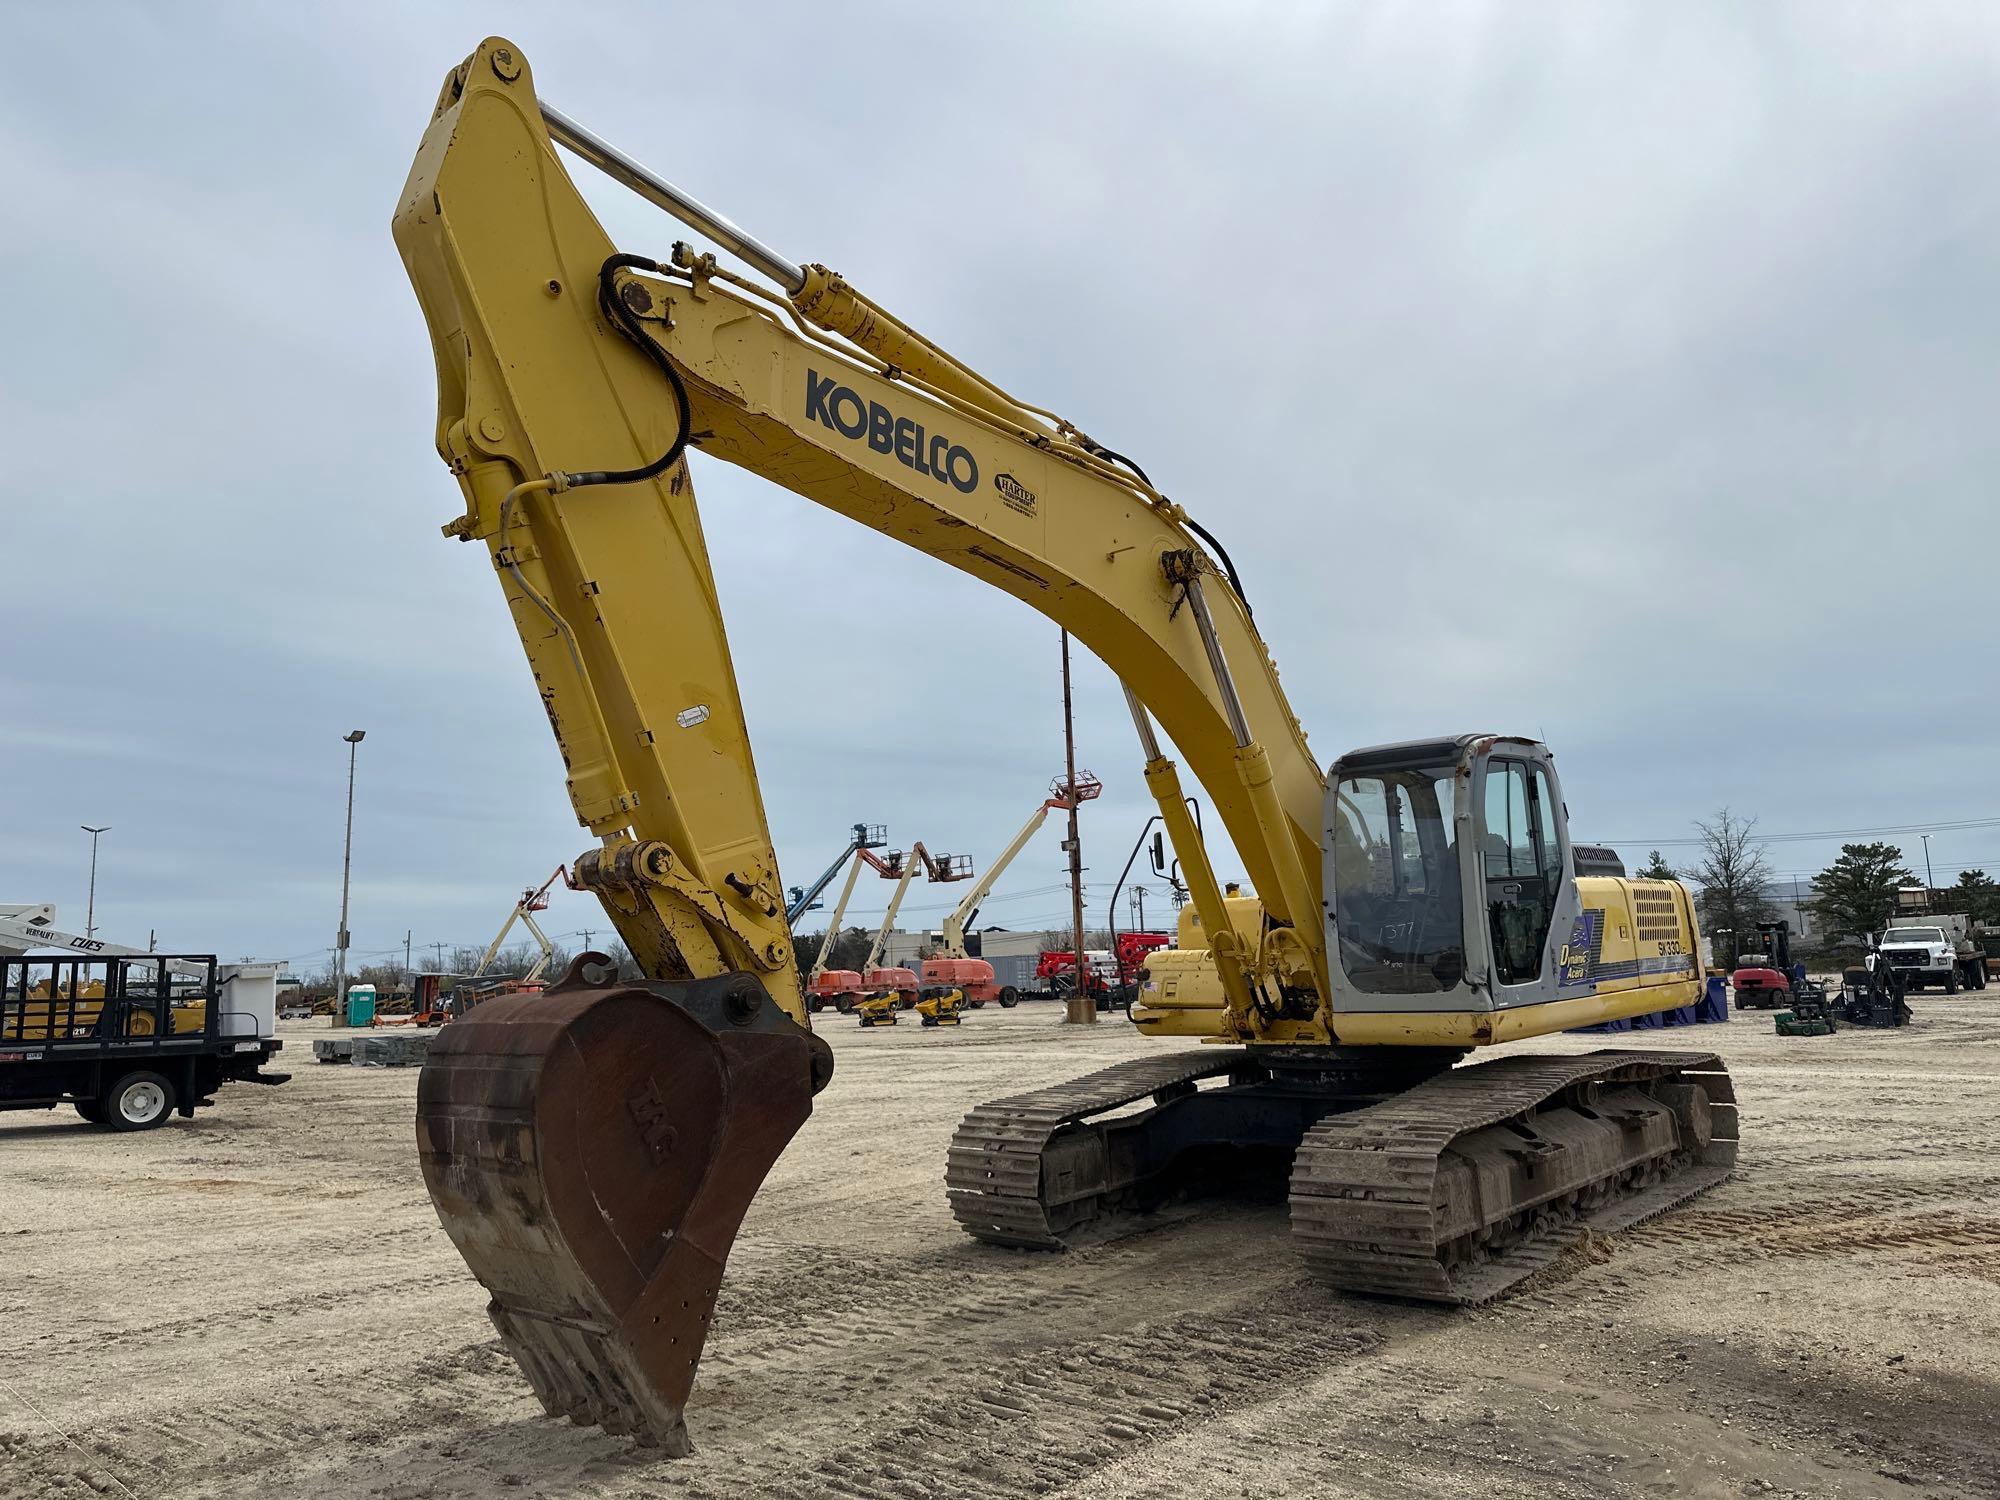 KOBELCO SK330LC HYDRAULIC EXCAVATOR SN:1070 powered by diesel engine, equipped with Cab, air, heat,